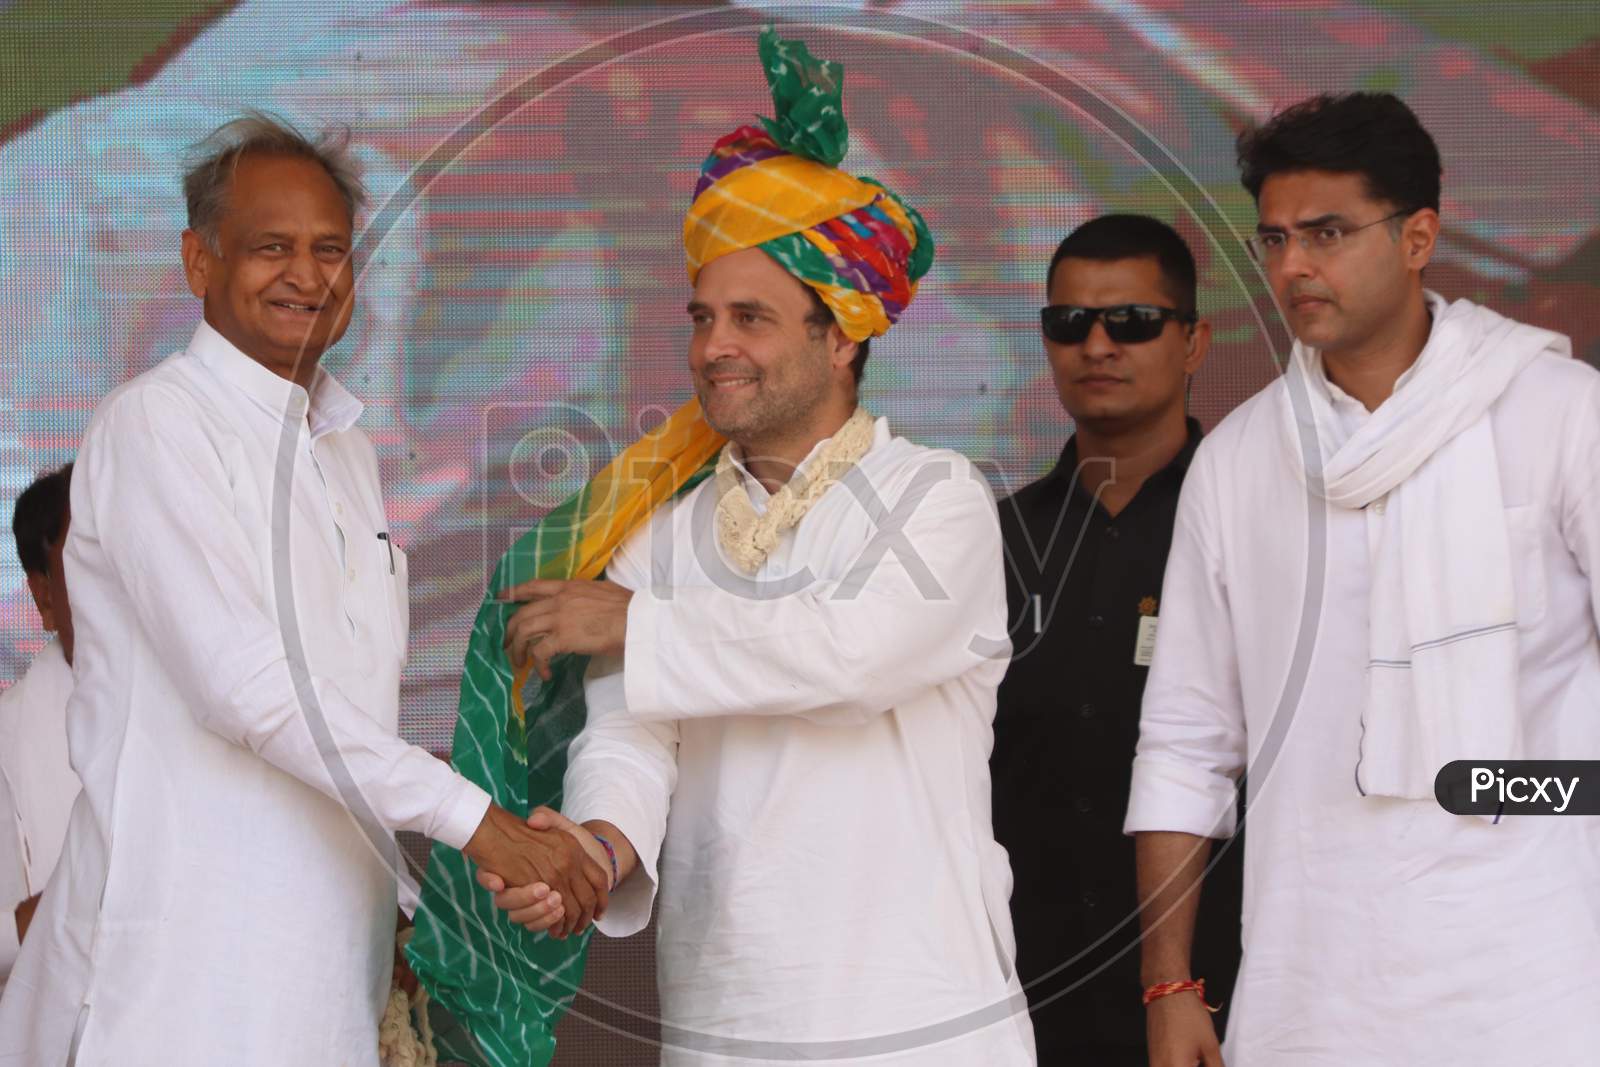 Rahul Gandhi, President of Indian National Congress(INC) with Ashok Gehlot, Chief Minister of Rajasthan and Sachin Pilot, Deputy Chief Minister of Rajasthan during an election campaign in a village near Ajmer, Rajasthan on April 25, 2019